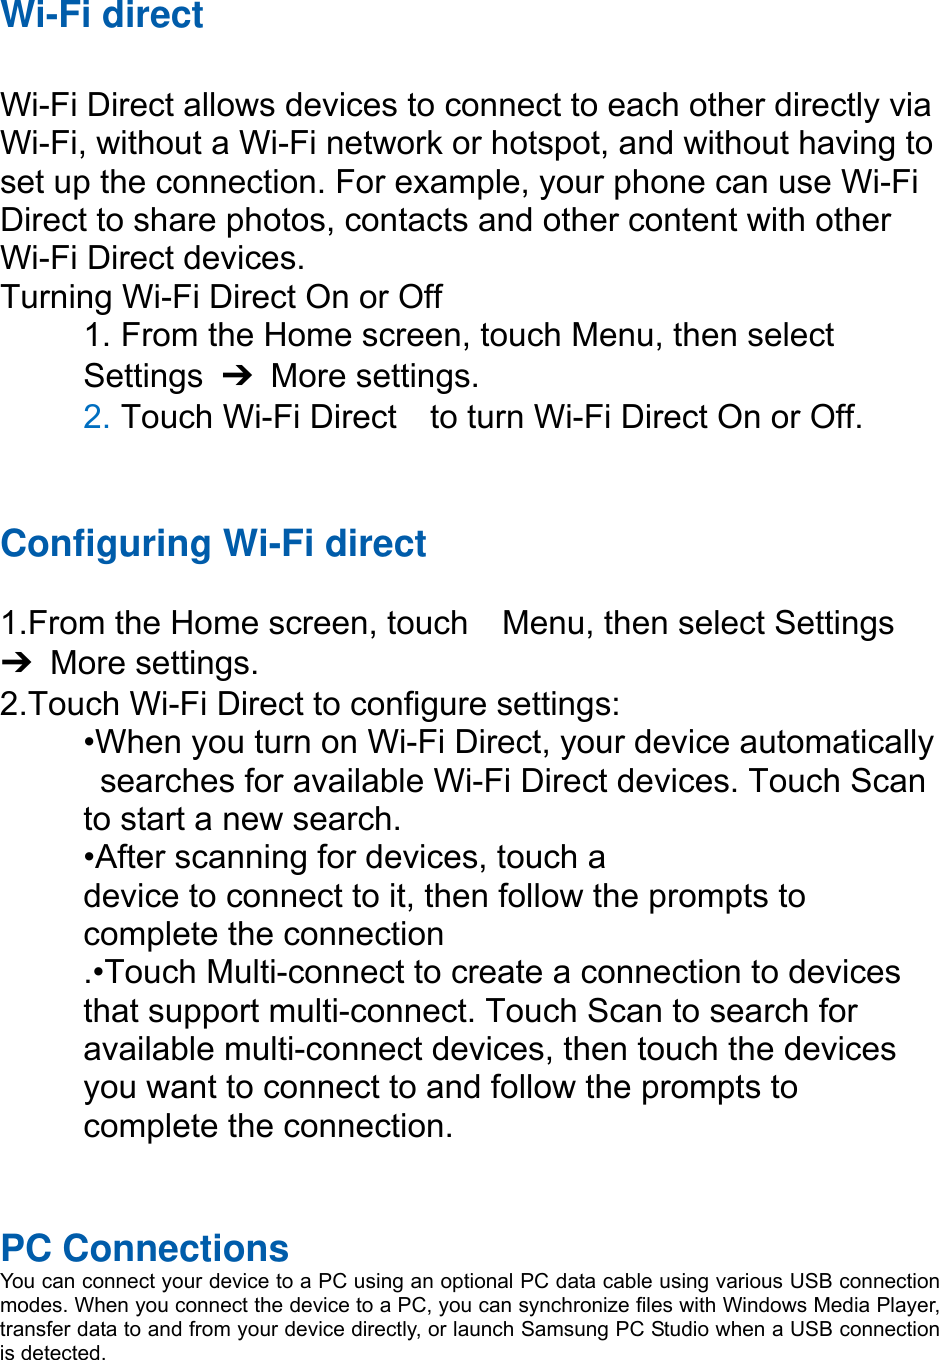 Wi-Fi direct  Wi-Fi Direct allows devices to connect to each other directly via Wi-Fi, without a Wi-Fi network or hotspot, and without having to set up the connection. For example, your phone can use Wi-Fi Direct to share photos, contacts and other content with other Wi-Fi Direct devices.   Turning Wi-Fi Direct On or Off 1. From the Home screen, touch Menu, then select   Settings  ➔ More settings. 2. Touch Wi-Fi Direct    to turn Wi-Fi Direct On or Off.   Configuring Wi-Fi direct   1.From the Home screen, touch    Menu, then select Settings ➔ More settings. 2.Touch Wi-Fi Direct to configure settings:   •When you turn on Wi-Fi Direct, your device automatically   searches for available Wi-Fi Direct devices. Touch Scan   to start a new search. •After scanning for devices, touch a   device to connect to it, then follow the prompts to   complete the connection .•Touch Multi-connect to create a connection to devices that support multi-connect. Touch Scan to search for available multi-connect devices, then touch the devices you want to connect to and follow the prompts to complete the connection.    PC Connections You can connect your device to a PC using an optional PC data cable using various USB connection modes. When you connect the device to a PC, you can synchronize files with Windows Media Player, transfer data to and from your device directly, or launch Samsung PC Studio when a USB connection is detected.  